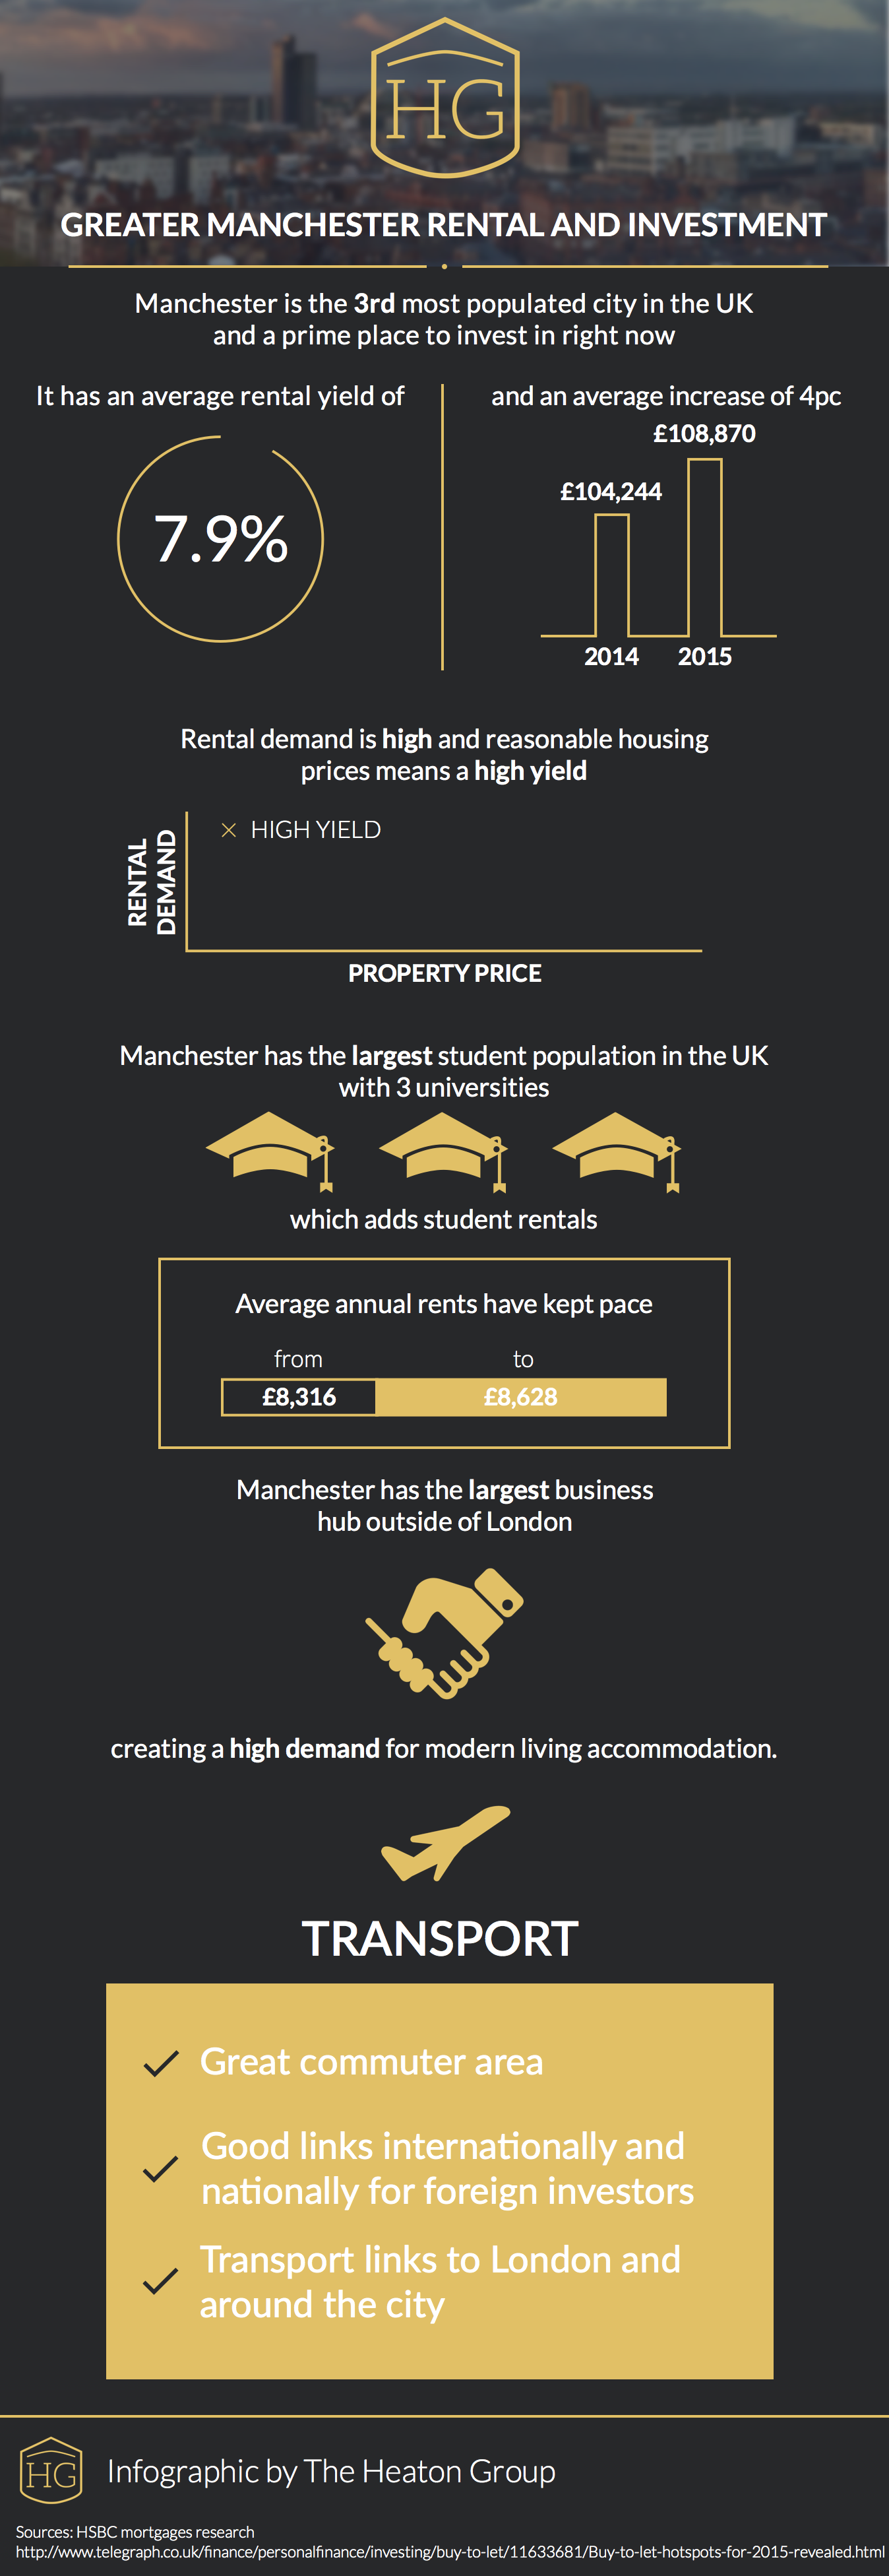 renting in manchester high yield modern living accommodation manchester vs london prime investing points